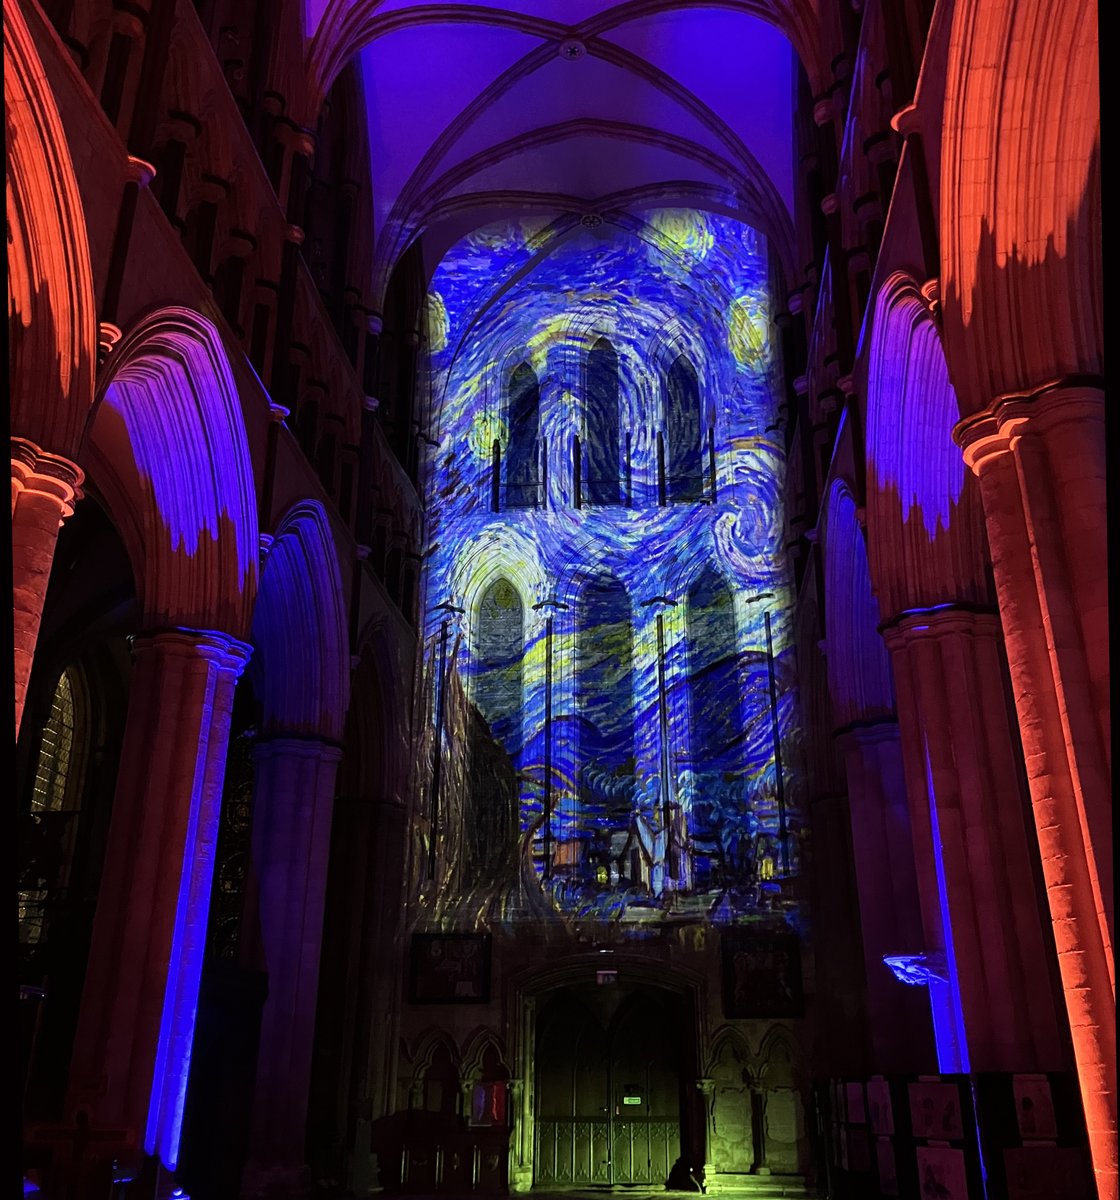 It's a starry starry night with @luxmuralis at @Bev_Minster